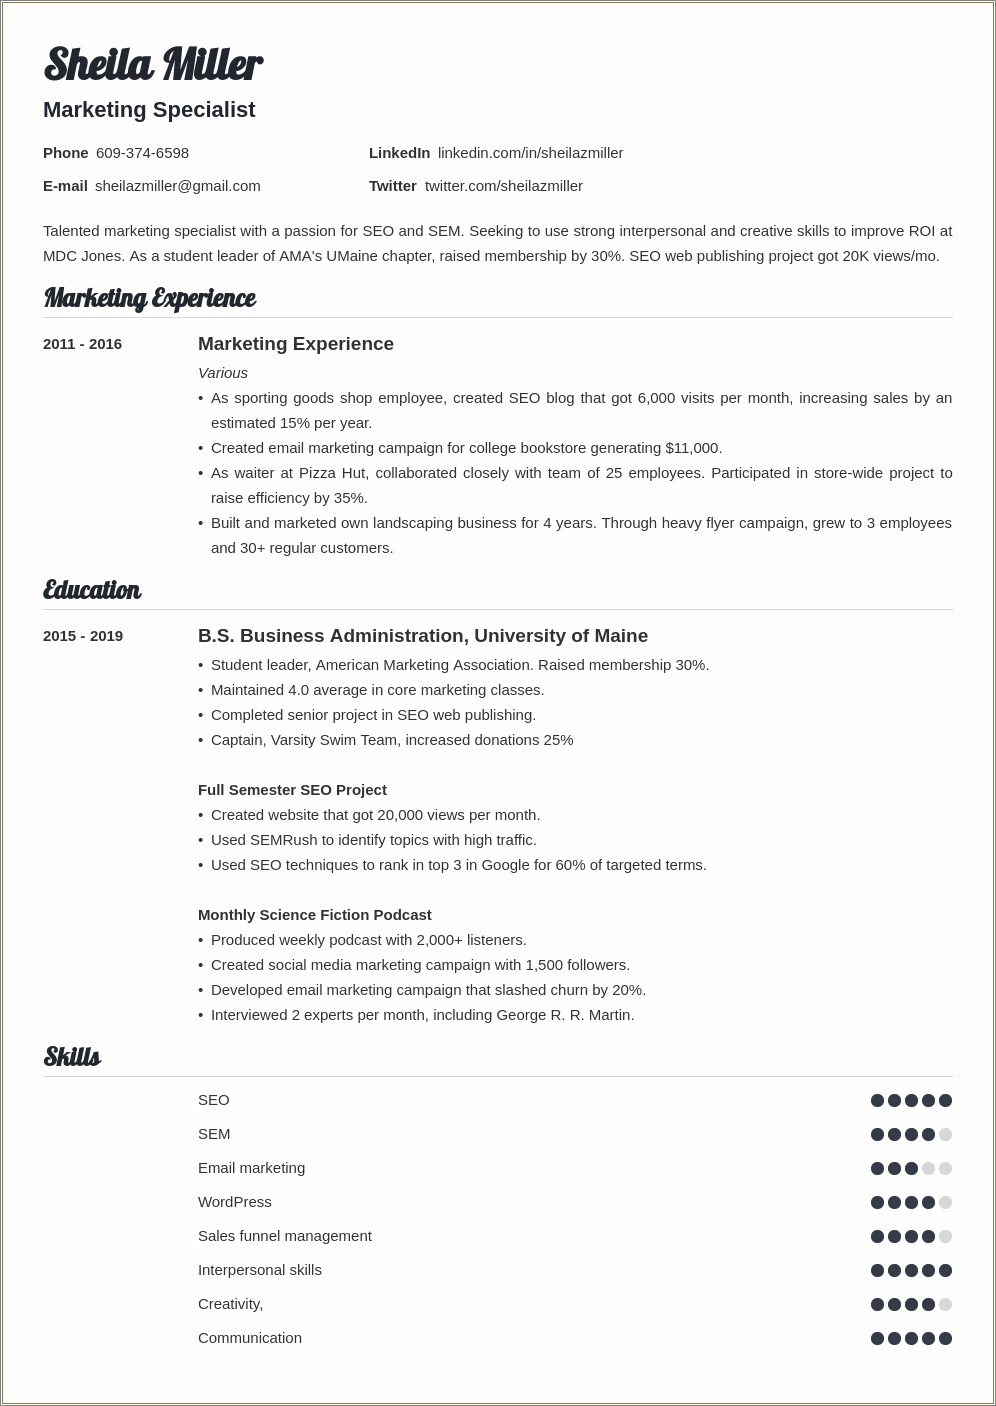 Resume Format On Campus Jobs